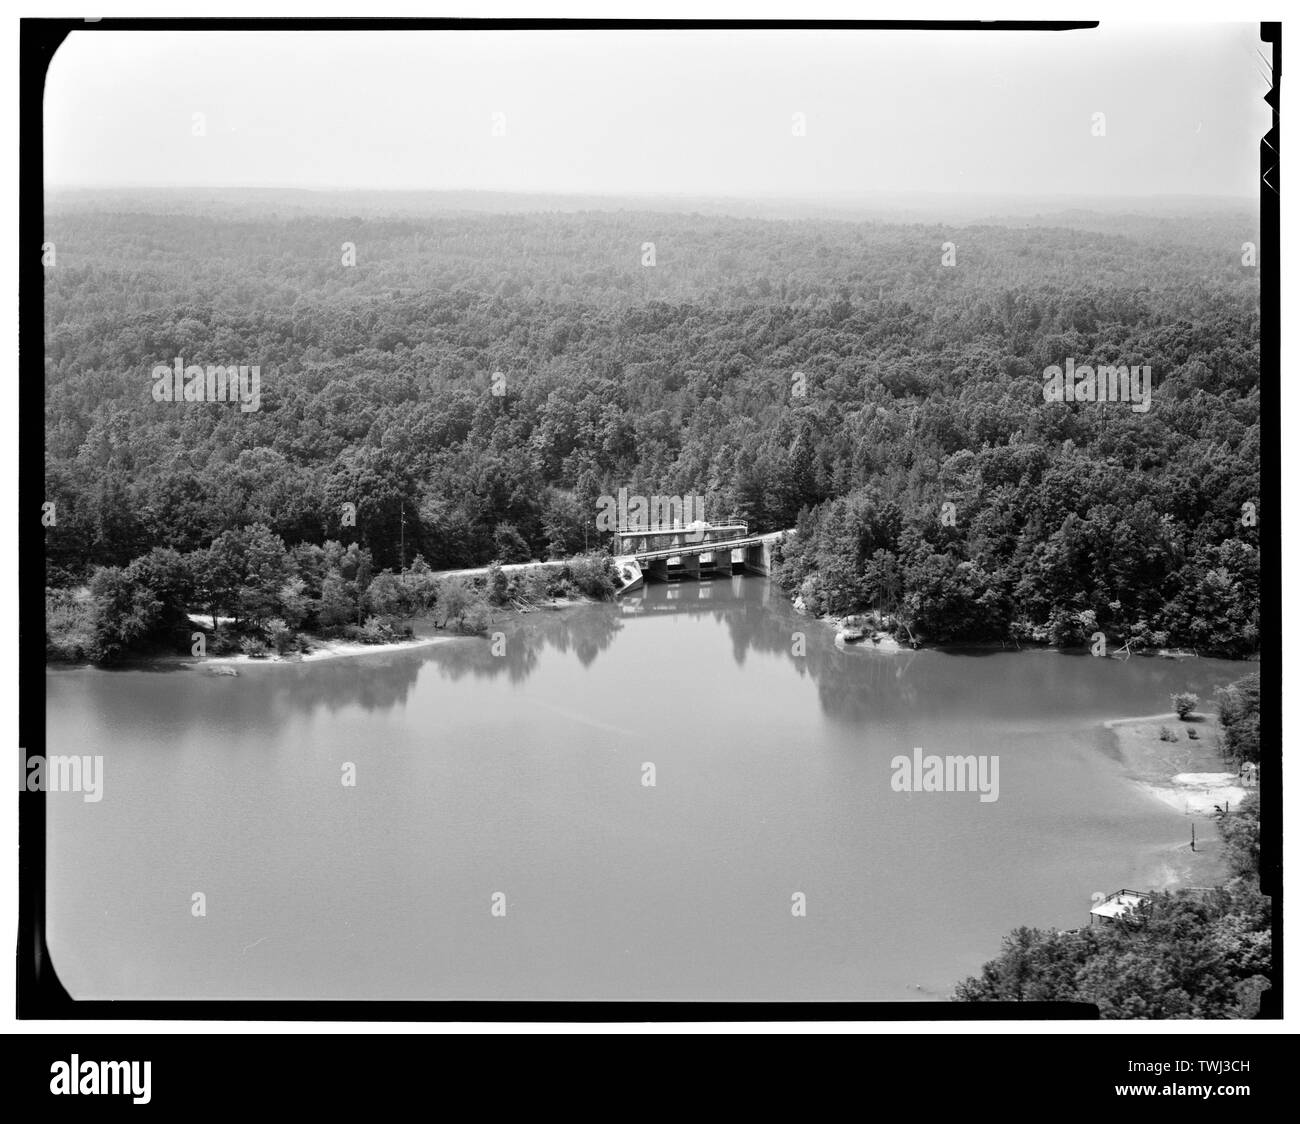 Secession Lake dam- aerial view of spillway from lake - Abbeville Hydroelectric Power Plant, State Highway 284 and County Road 72, Rocky River (historical), Abbeville County, SC; Abbeville Water and Electric Plant Company; Pennell, James Roy; White, W H; Abbeville Power Company Incorporated; D.M. Rickenbacker Construction Company; Townsend, C P; Wideman and Singleton; Britton, John B; S. Morgan Smith Company; Woodward Governor Company; Bethlehem Steel Company; Westinghouse Corporation; Bush Sulzer Brothers Company; Mark Brothers; Cary, Brian, transmitter Stock Photo